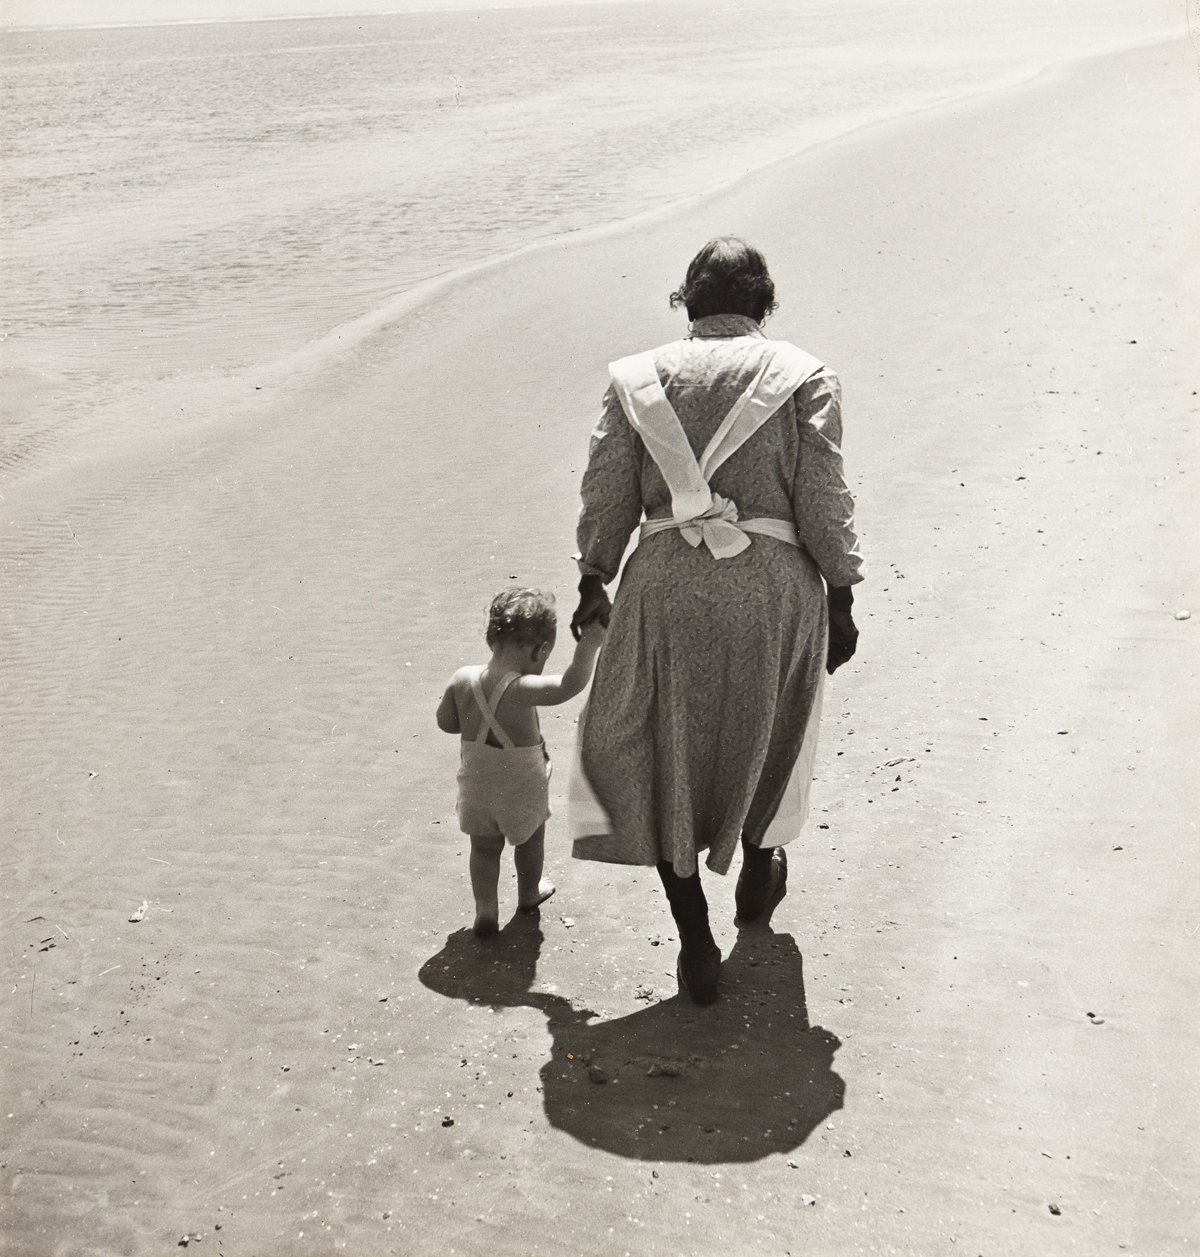 Frissell, Toni (1907-1988) Woman and Child on the Beach, Charleston, S.C.